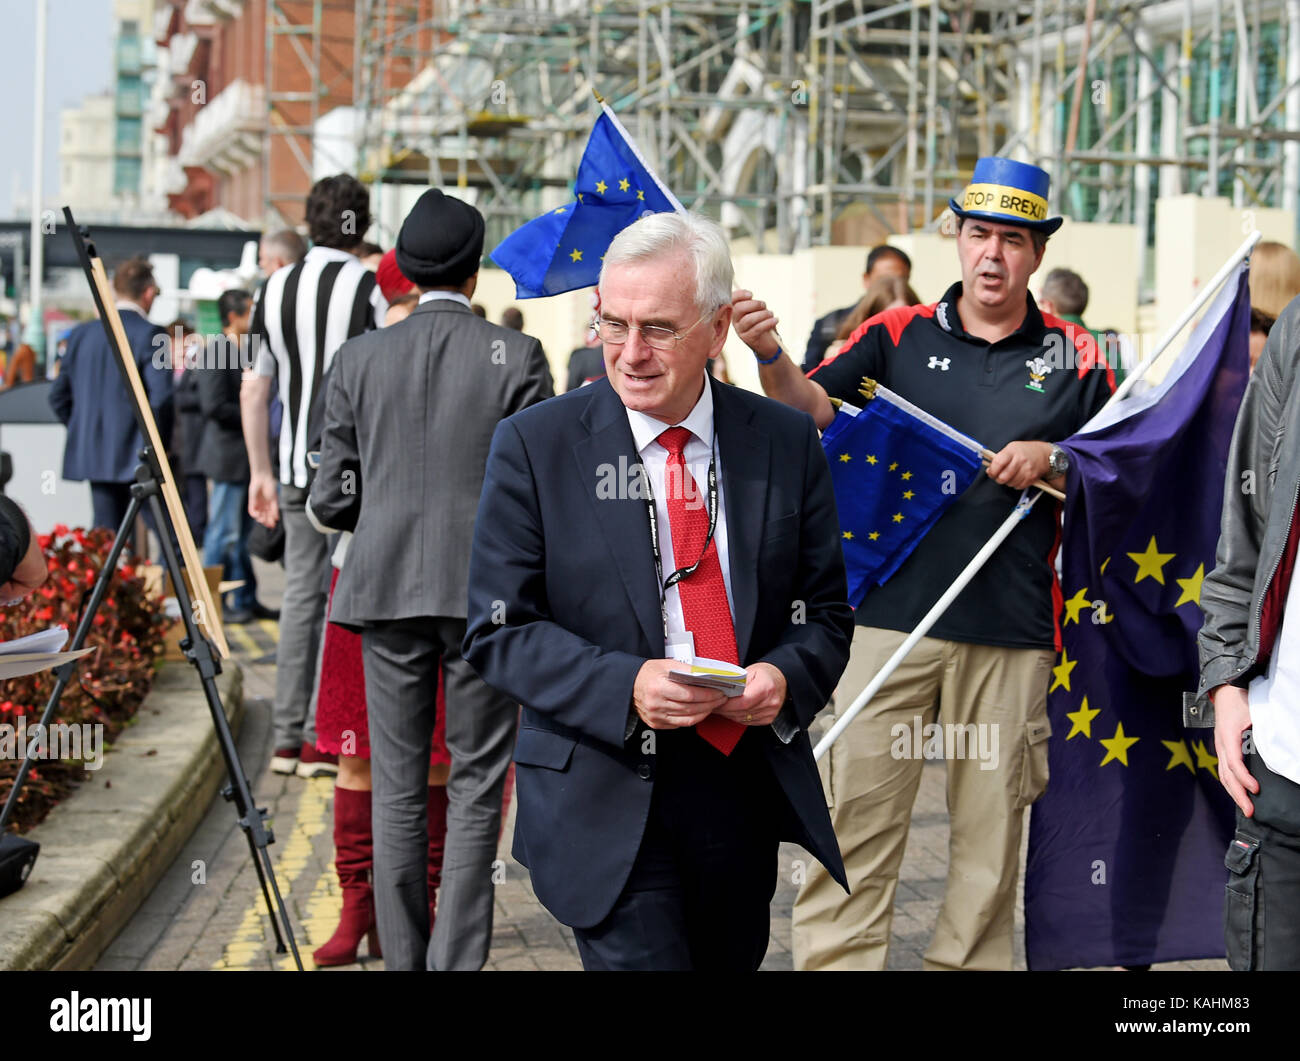 Brighton, UK. 26th Sep, 2017. John McDonnell the Shadow Chancellor of the Exchequer walks past anti Brexit protesters outside the Grand Hotel at the Labour Party Conference in Brighton today Credit: Simon Dack/Alamy Live News Stock Photo